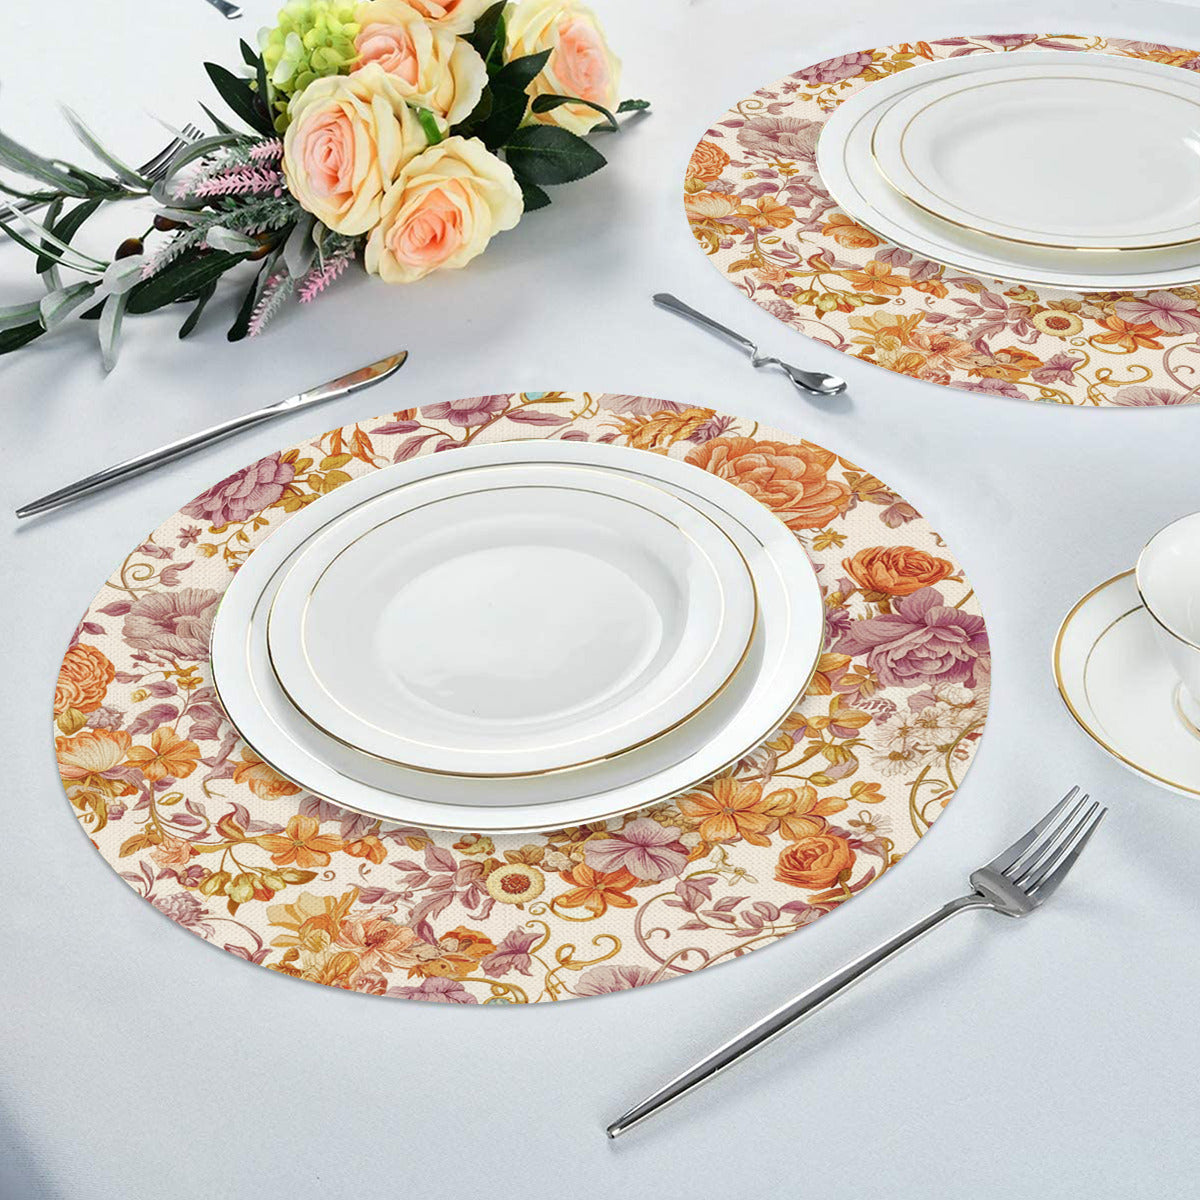 Vampire Art Retro Linen Round Placemats - Delicate Florals in Orange and Lilac